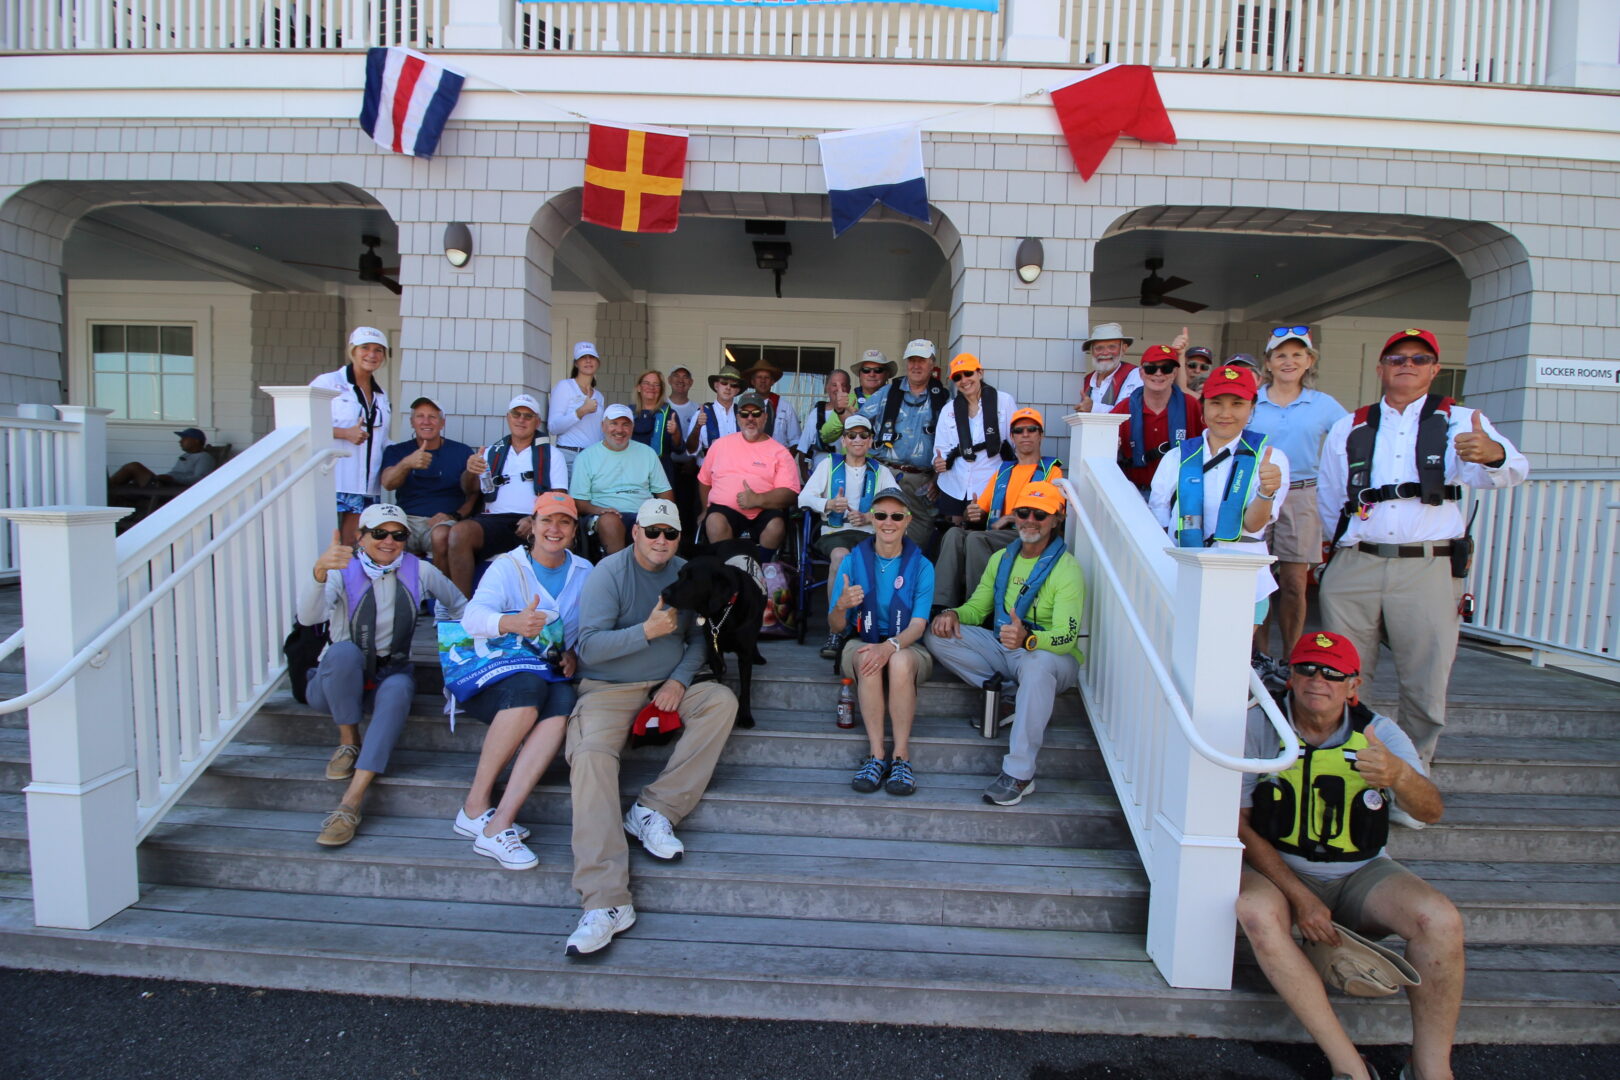 Large group photo of CRAB staff, volunteers, and regatta participants sitting and standing on steps in front of a building. 